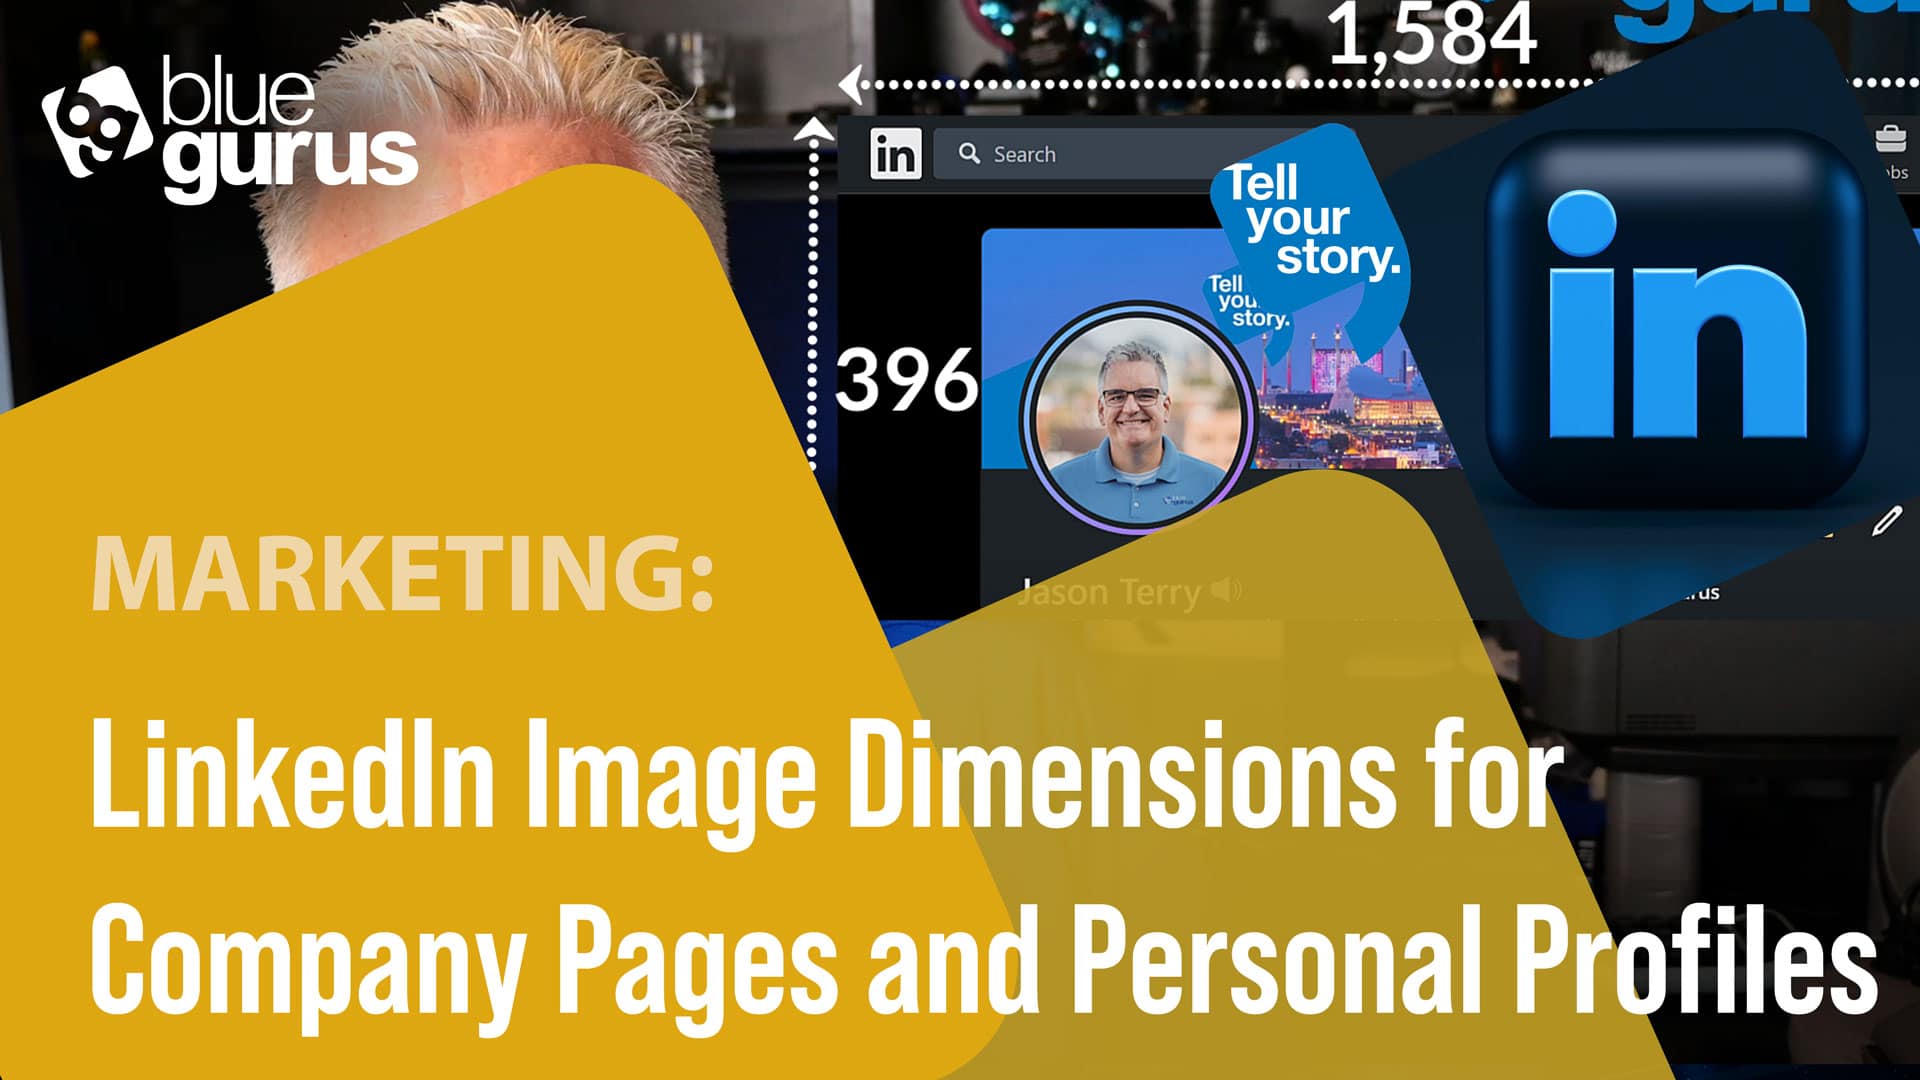 LinkedIn Image Dimensions for Business Pages and Personal Profiles